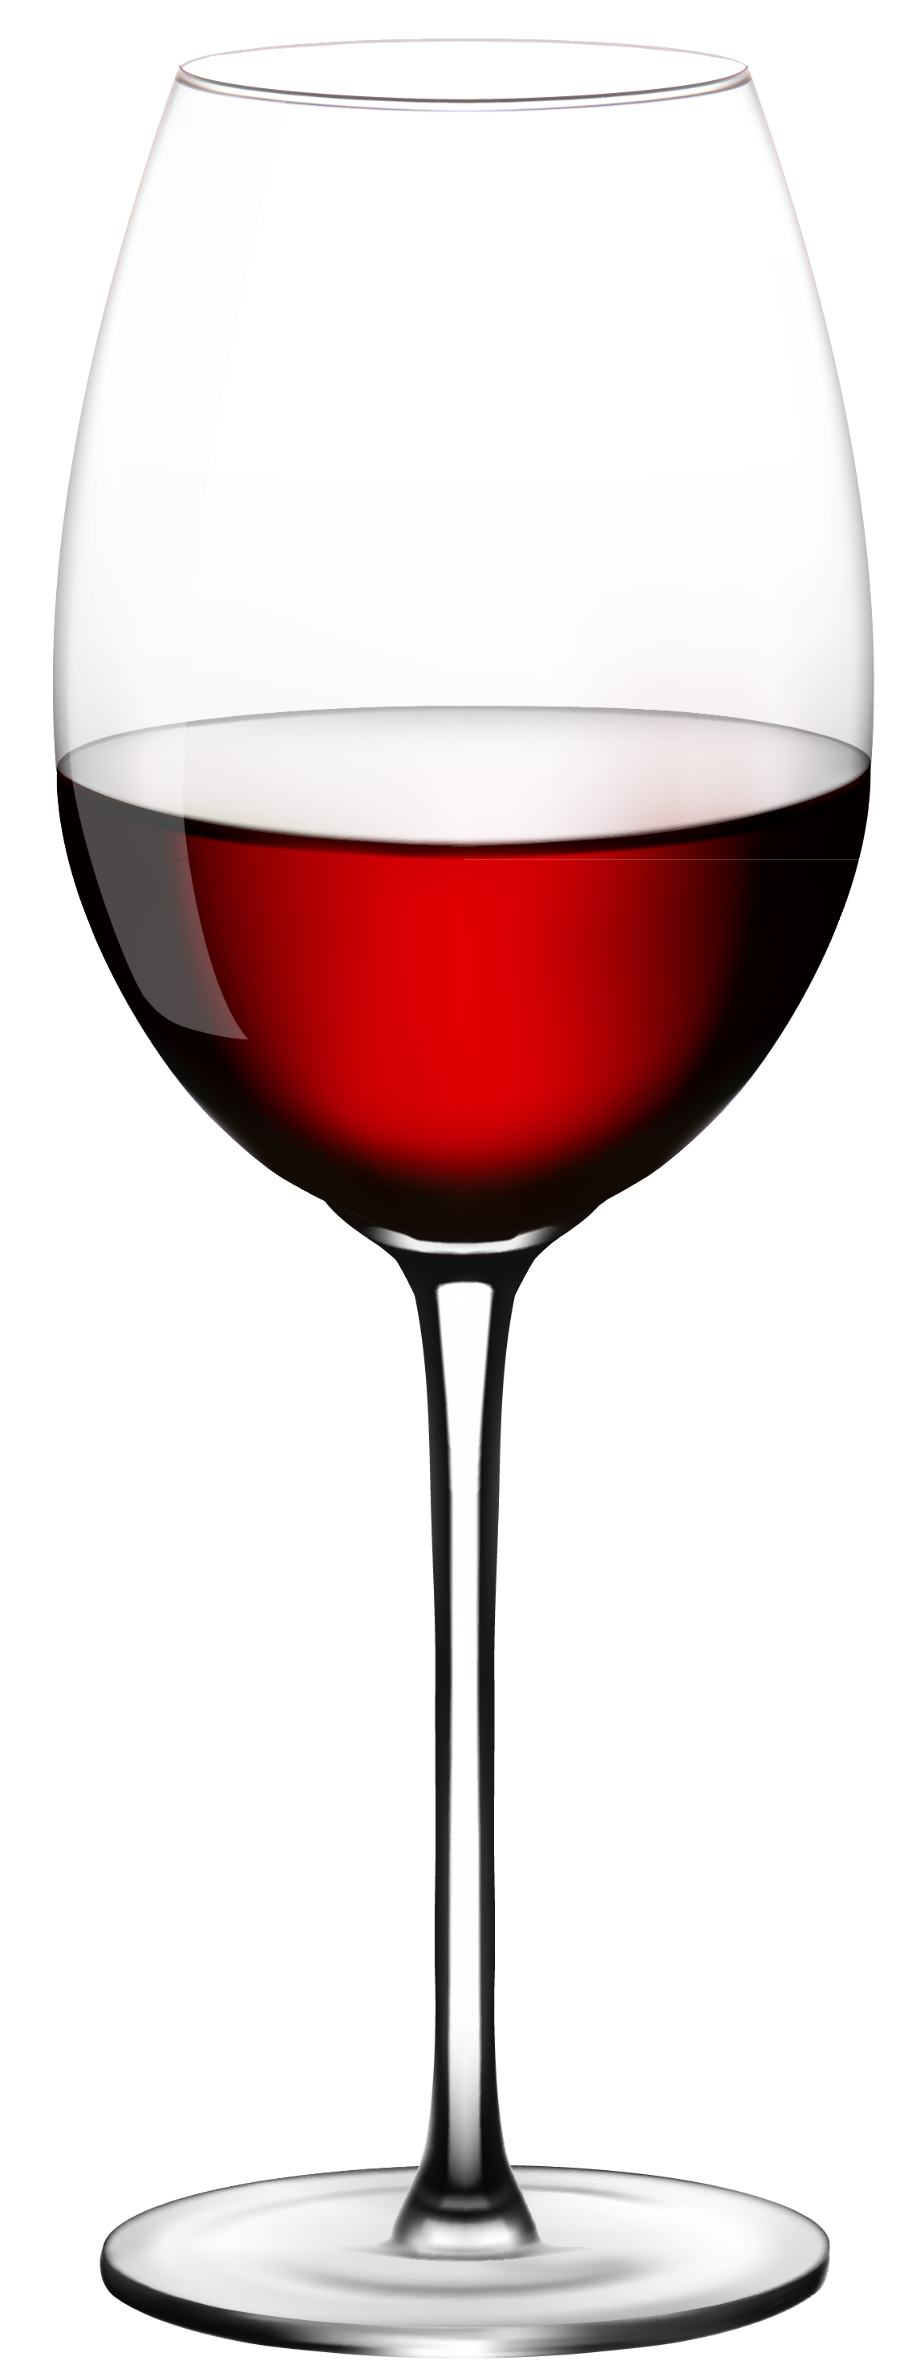 wine clipart clear background